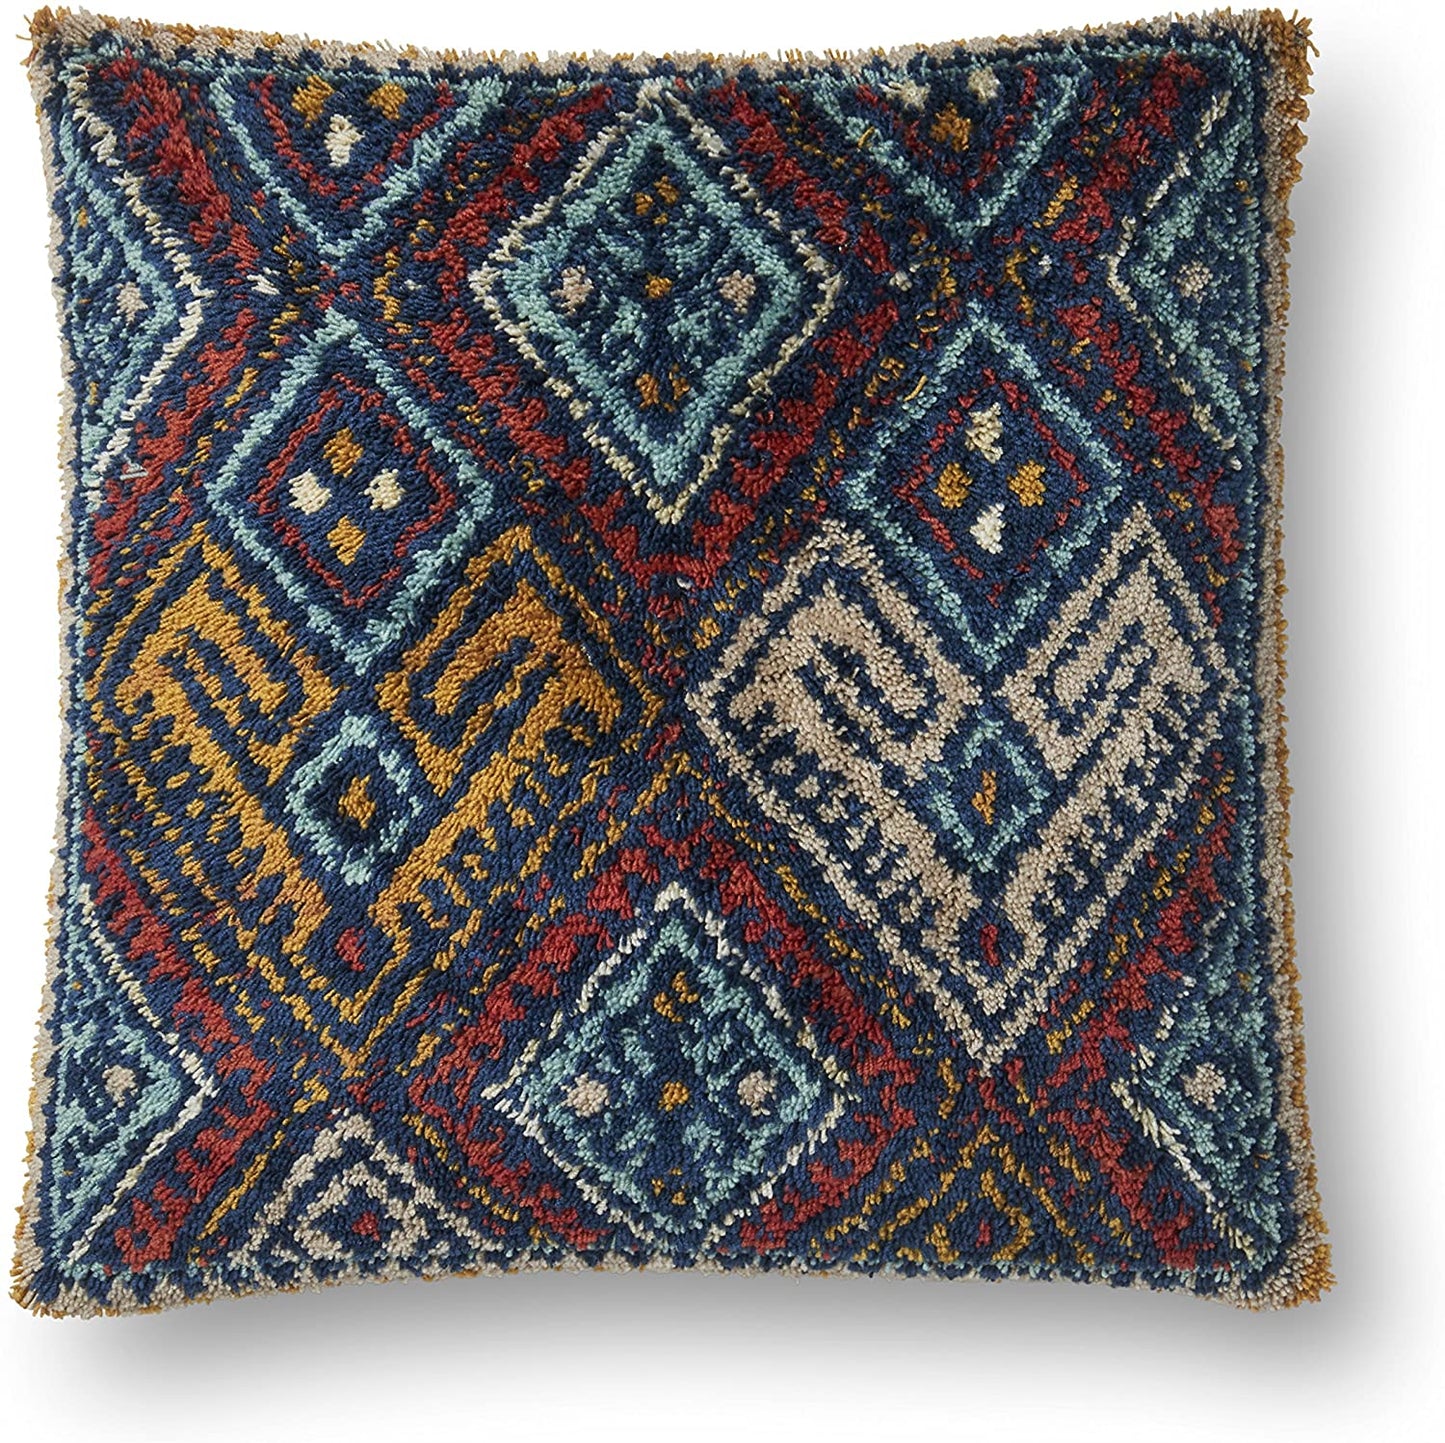 Pillow Cover Only/No Fill, 22" x 22", Multi